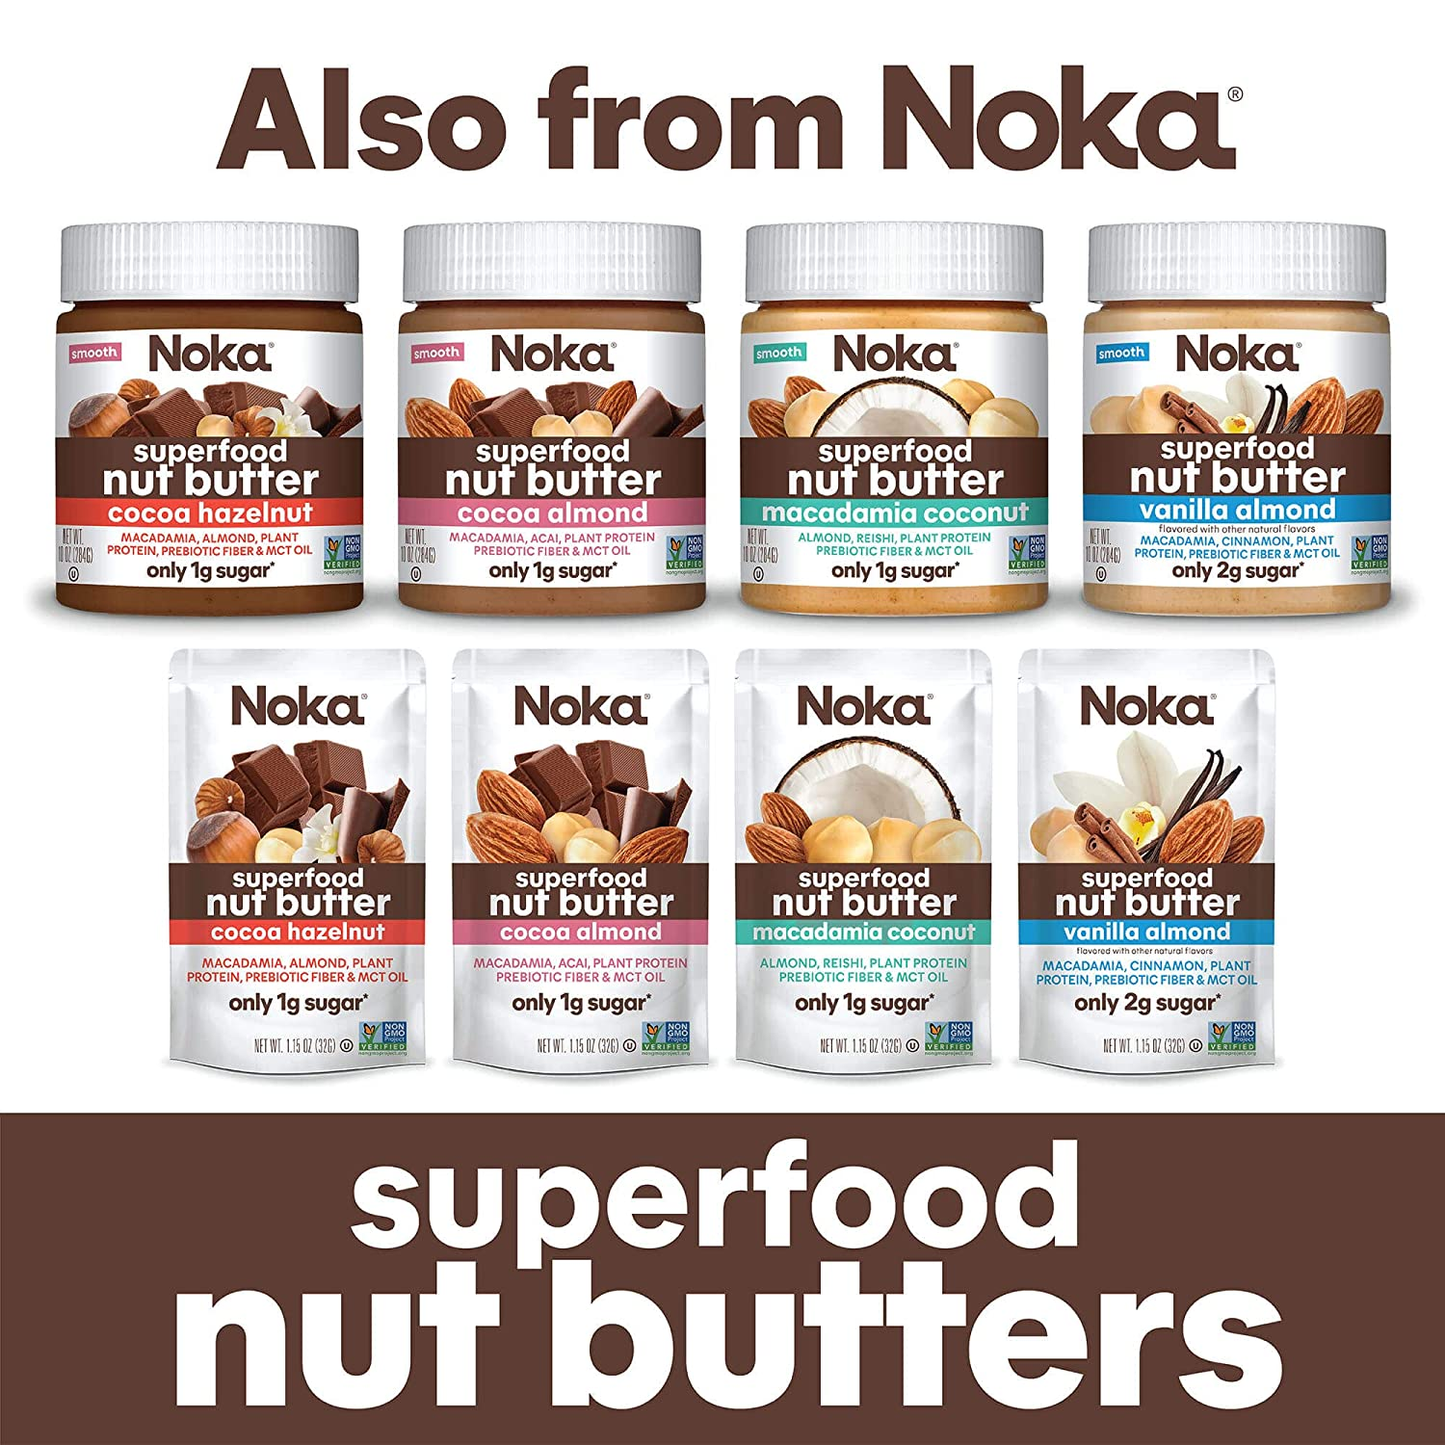 Noka Superfood Smoothie Pouches (Variety) 6 Pack, with Plant Protein, Prebiotic Fiber & Flax Seed, Organic, Gluten Free, Vegan, Healthy Fruit Squeeze Snack Pack, 4.22Oz Ea